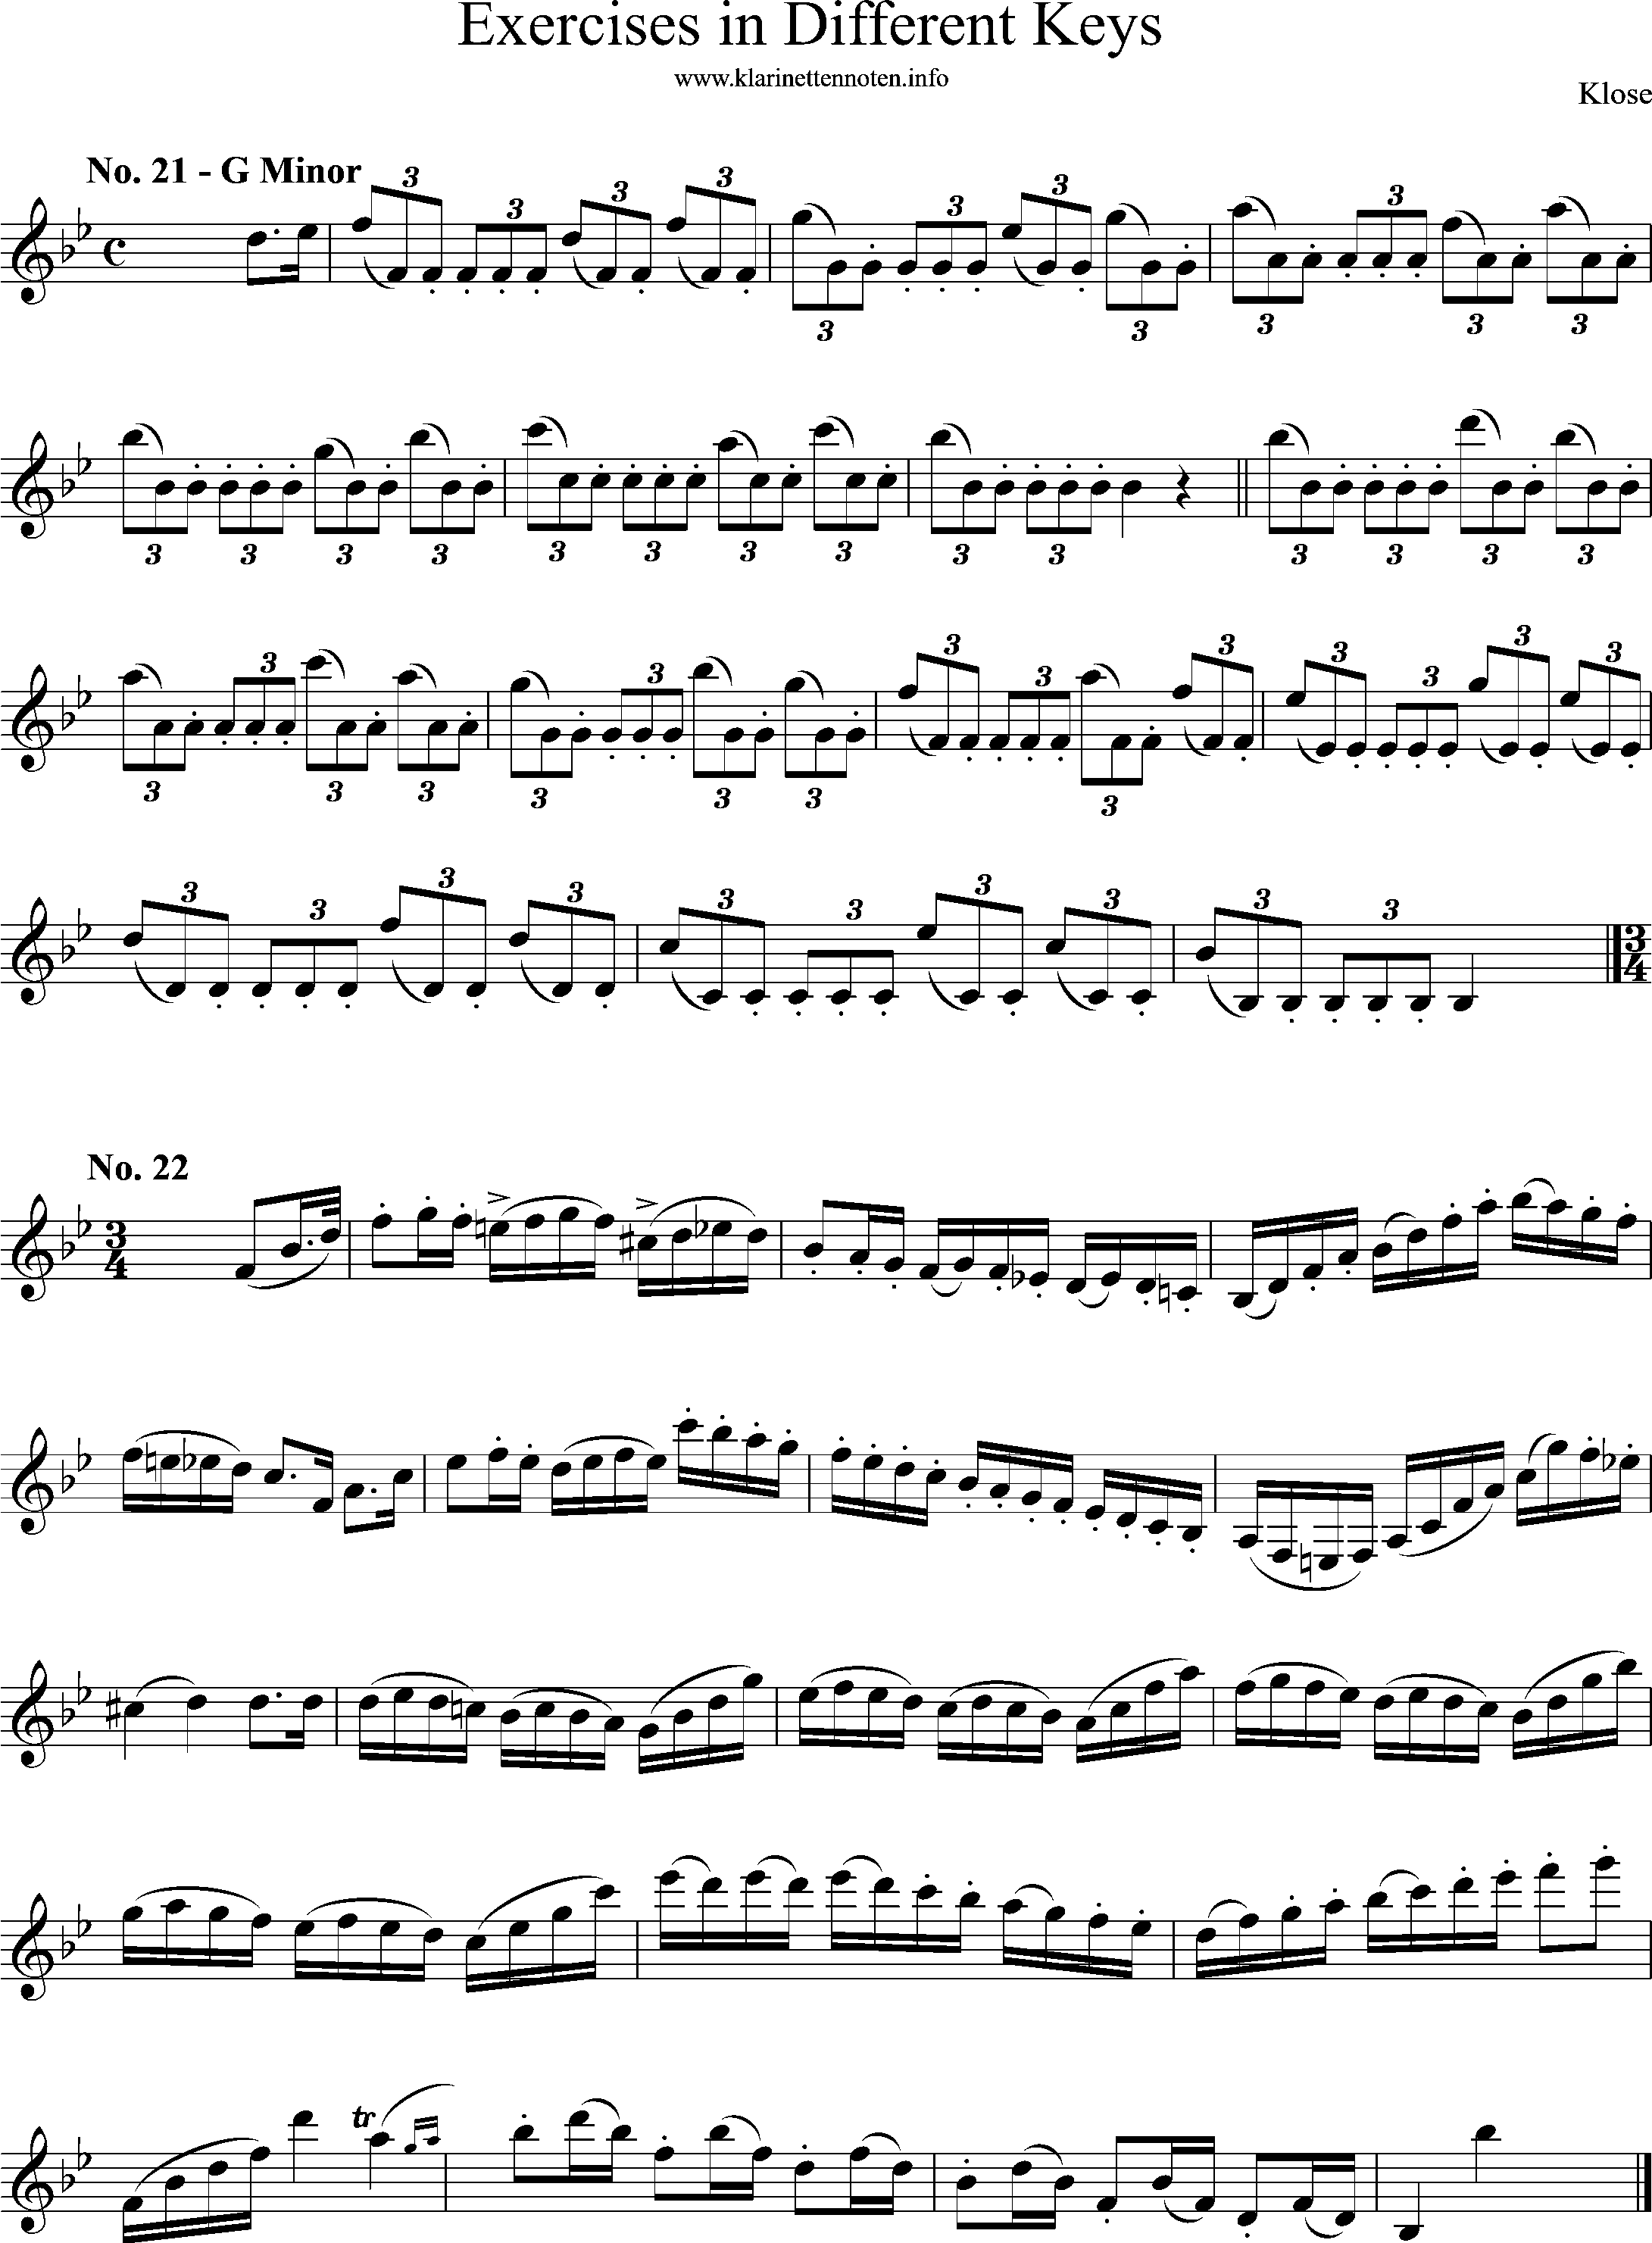 Exercises in Differewnt Keys, klose, No-21-22, G-Minor